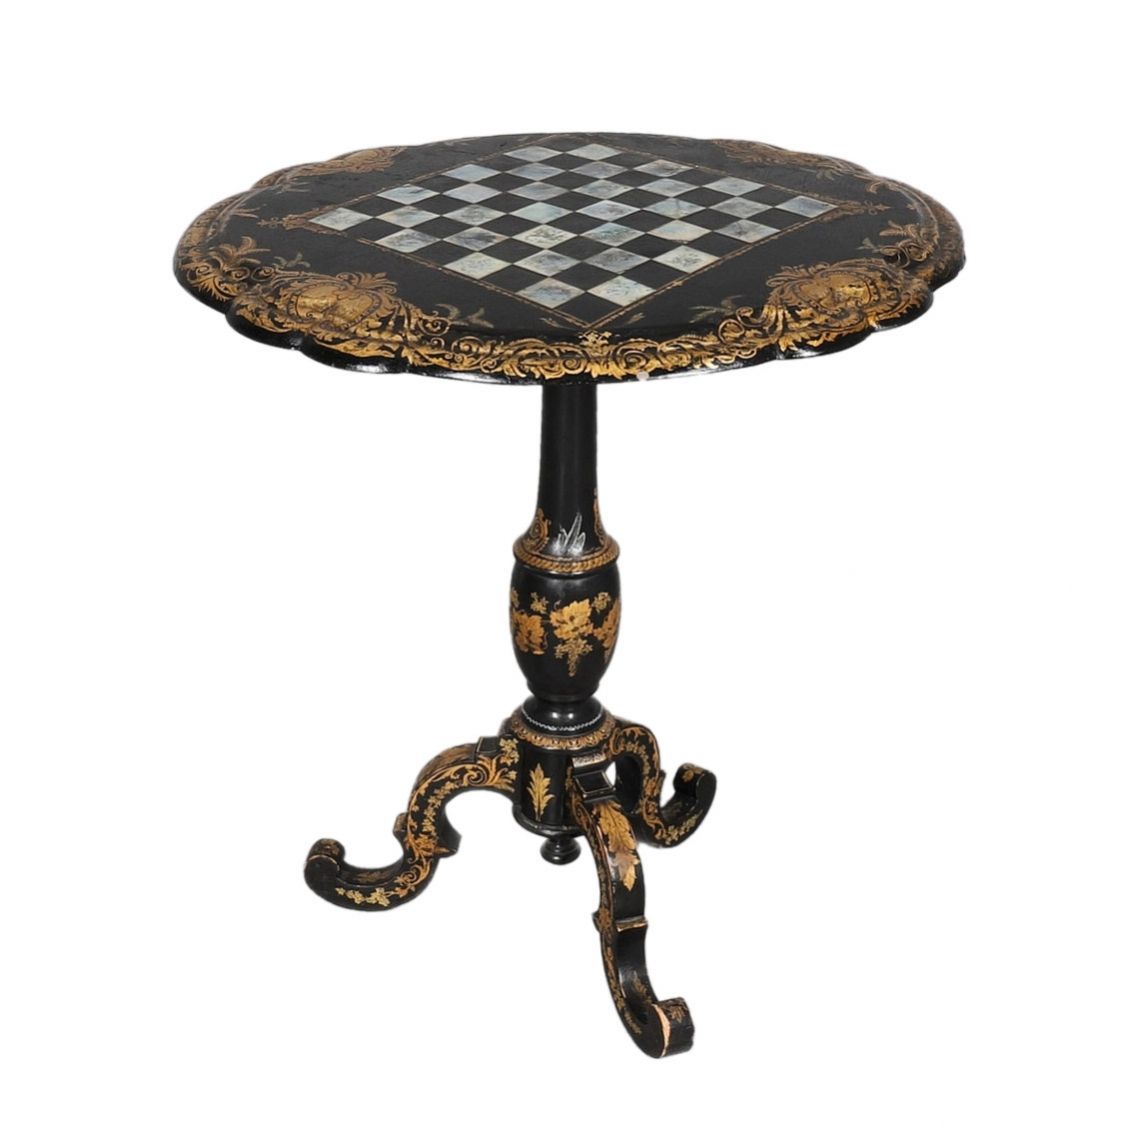 Great-chess-table-